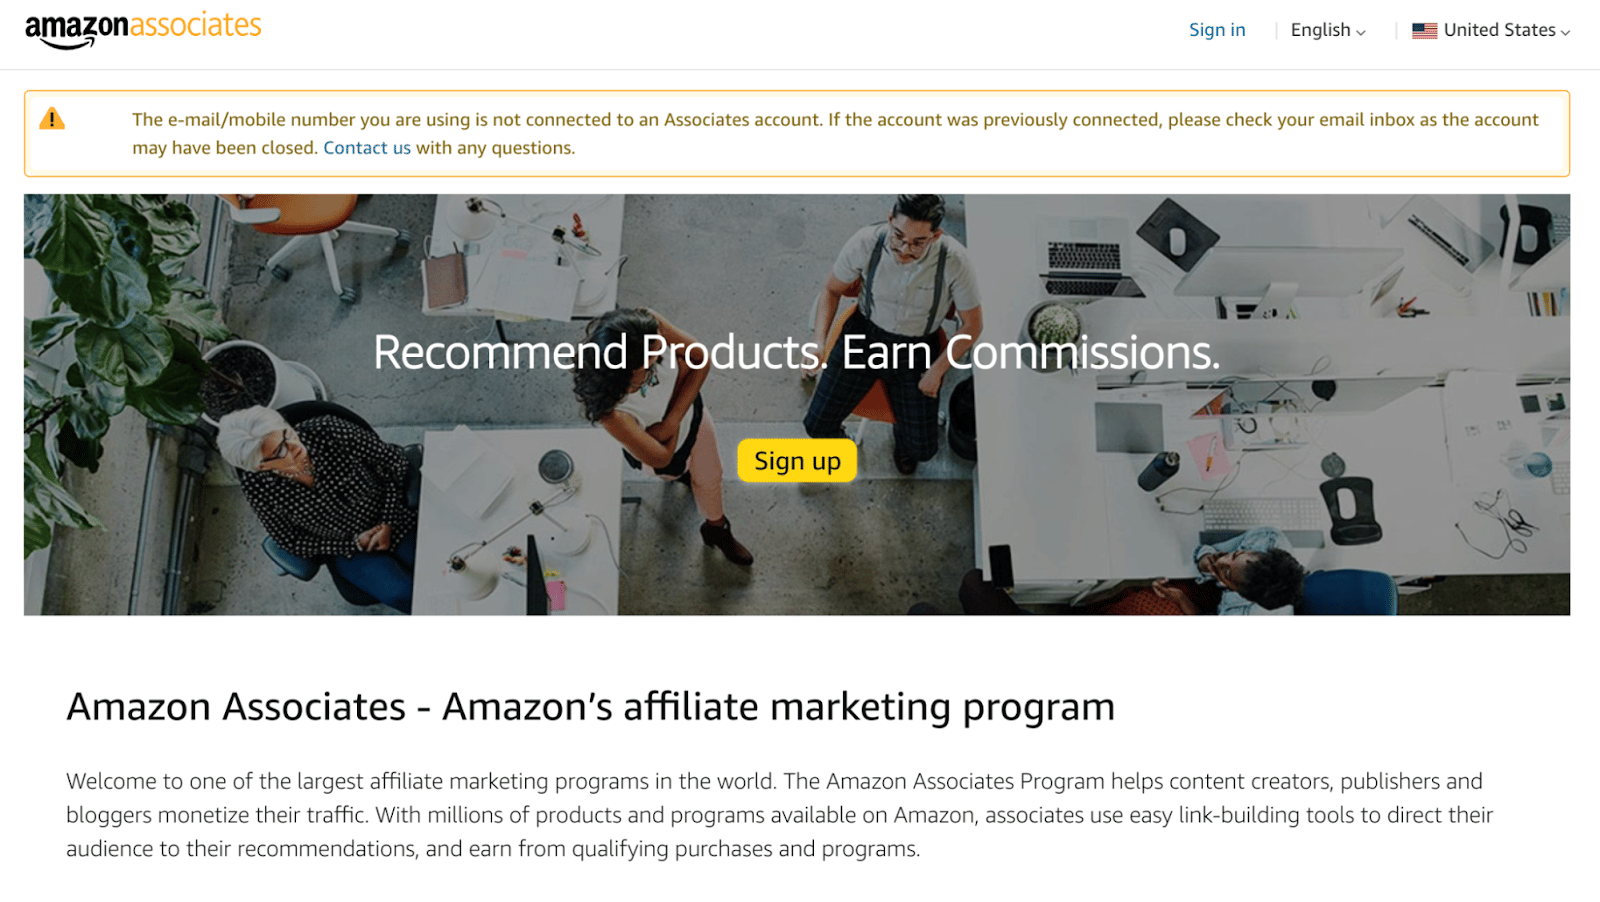 The homepage for Amazon Associates